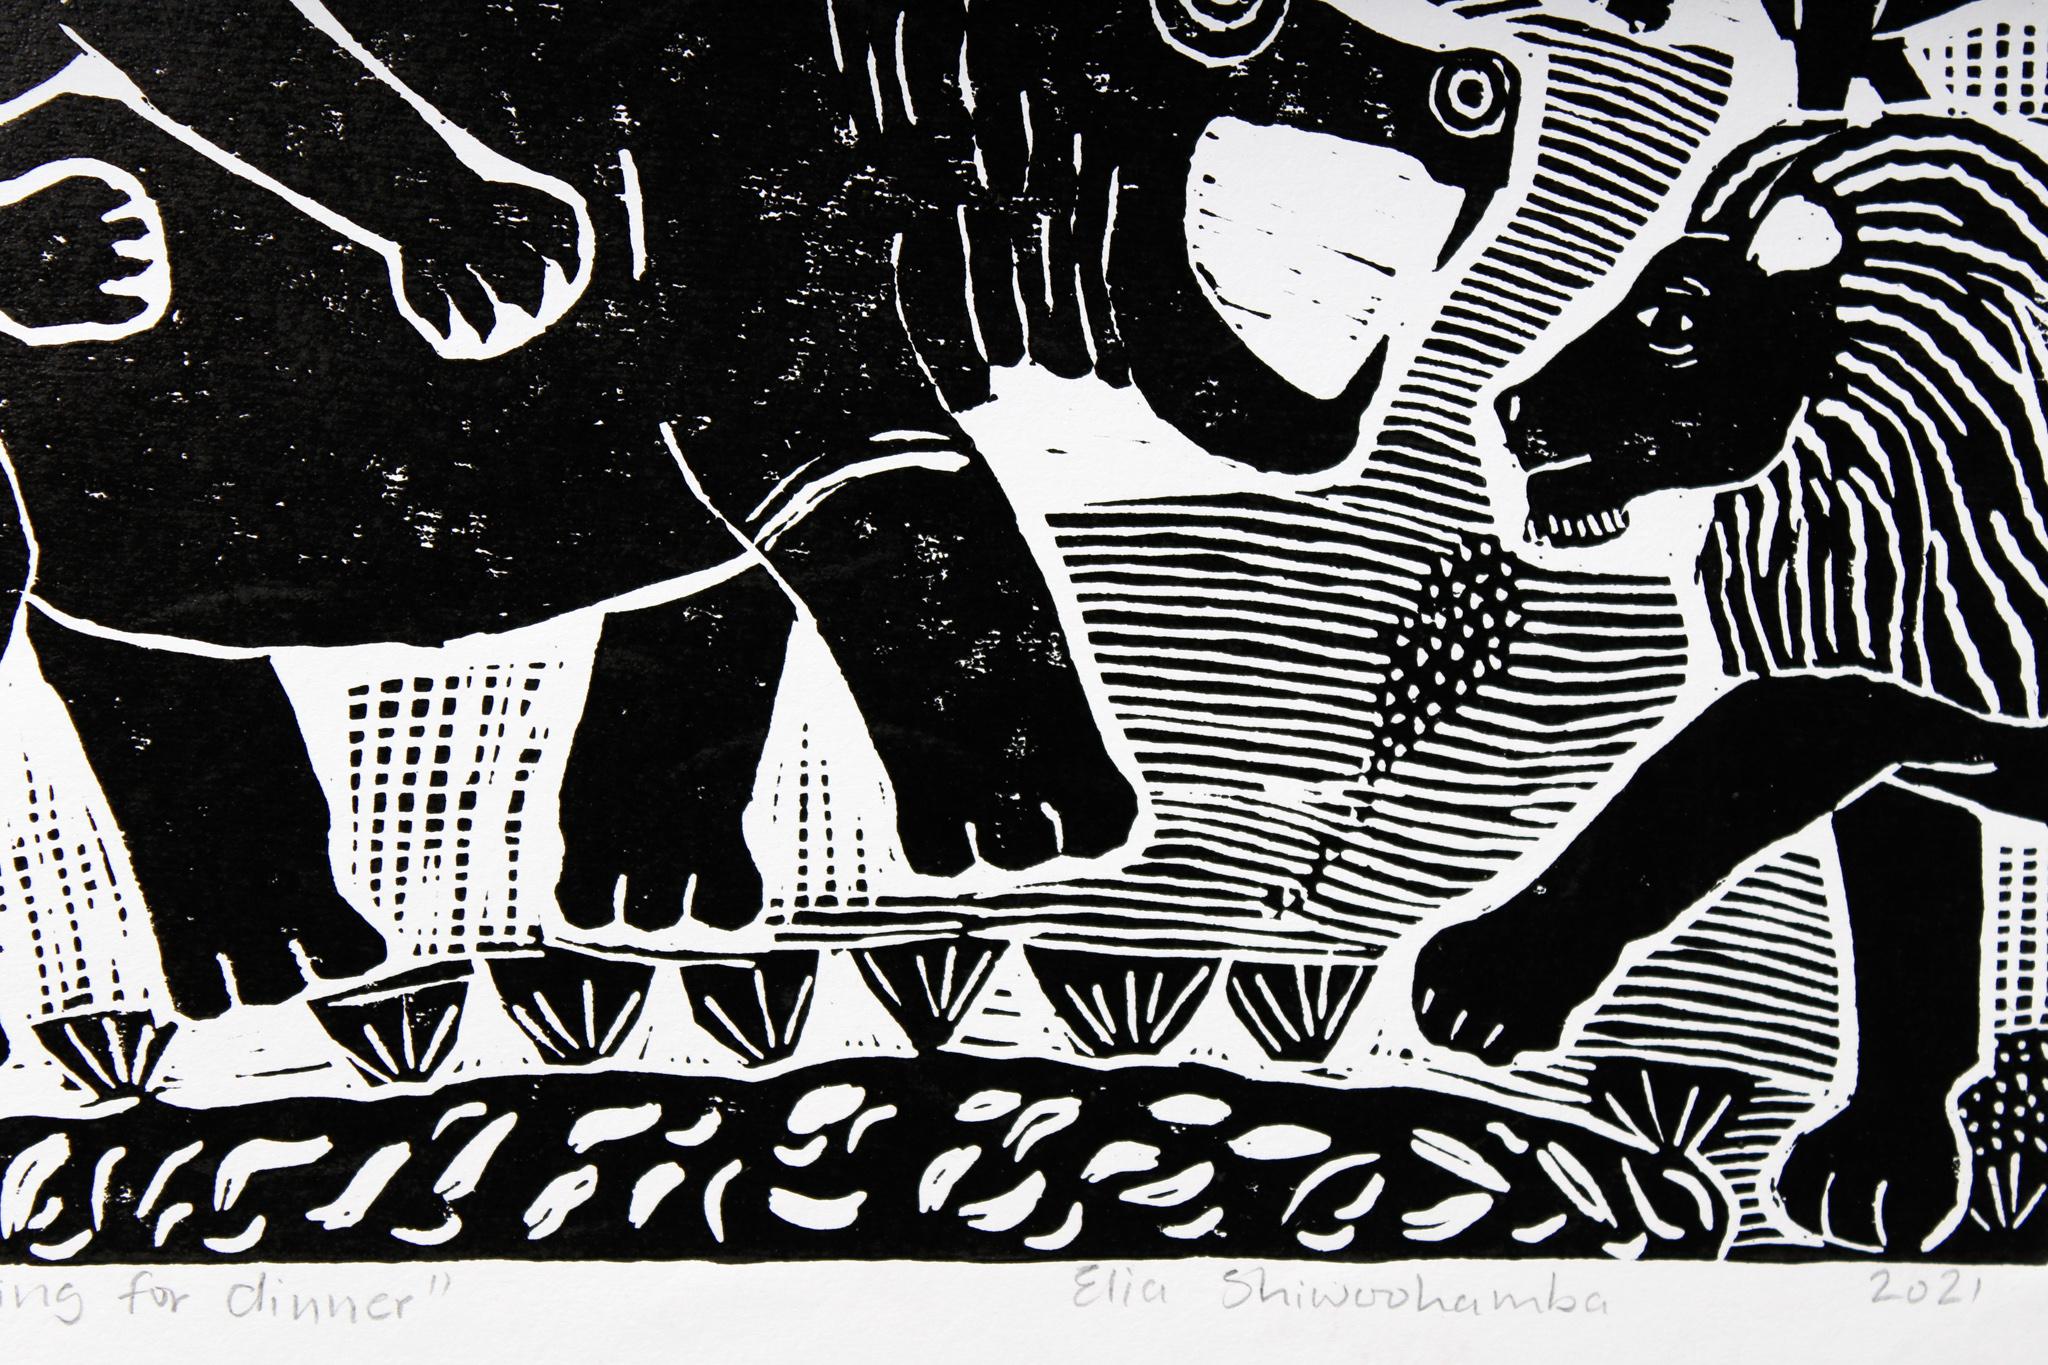 Fighting for dinner, Elia Shiwoohamba, Linoleum block print on paper For Sale 2